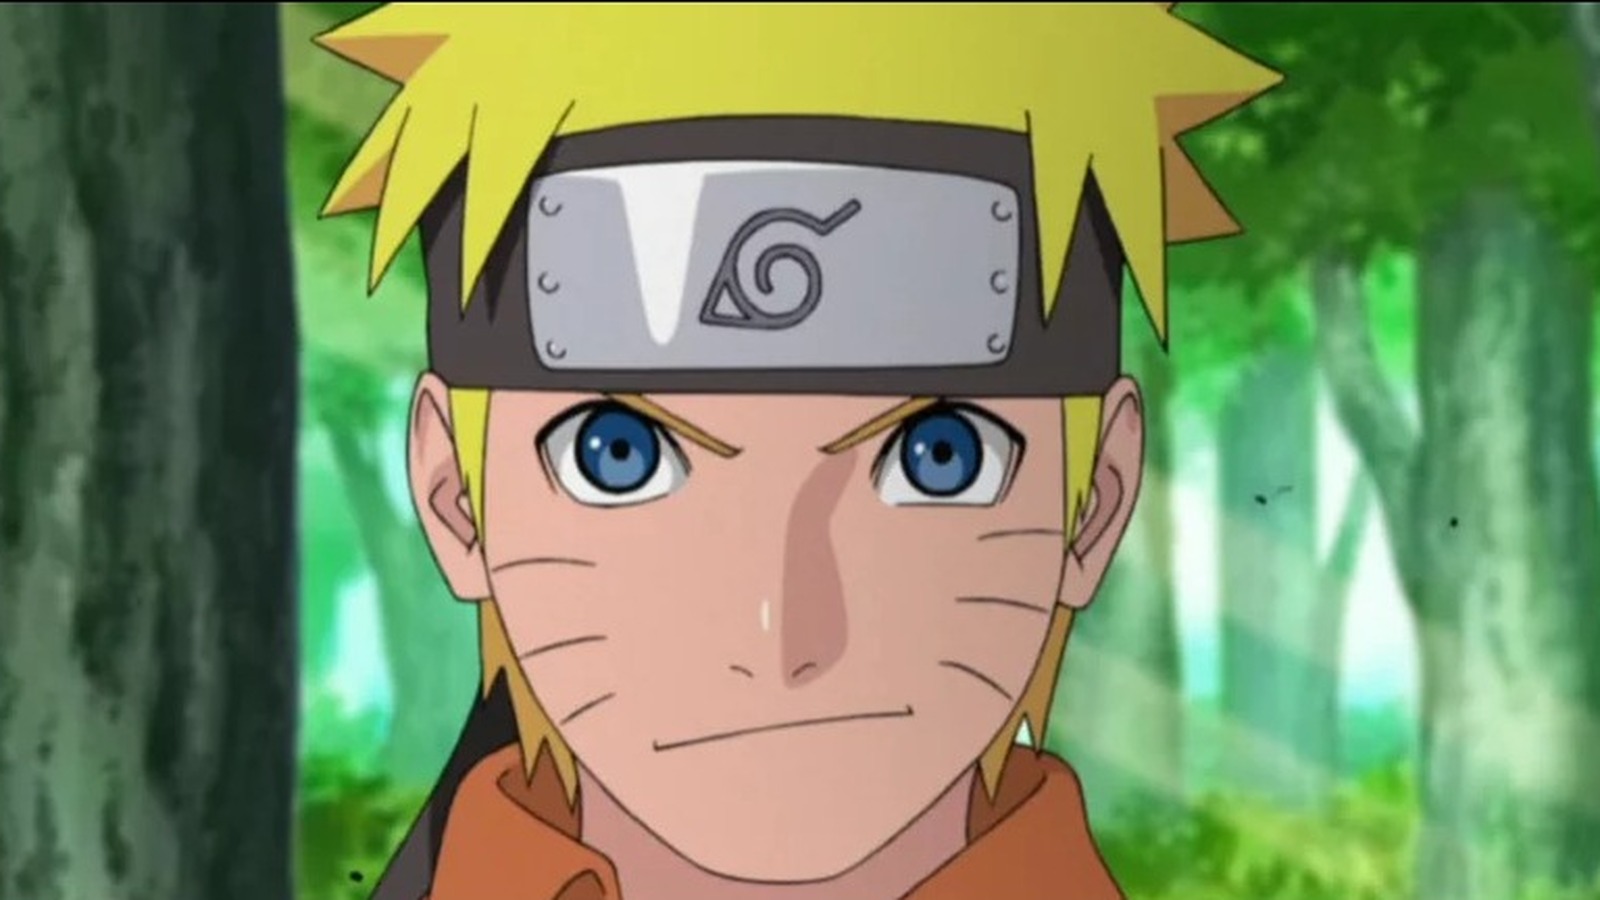 Naruto defeats Pain by transforming him into a toad